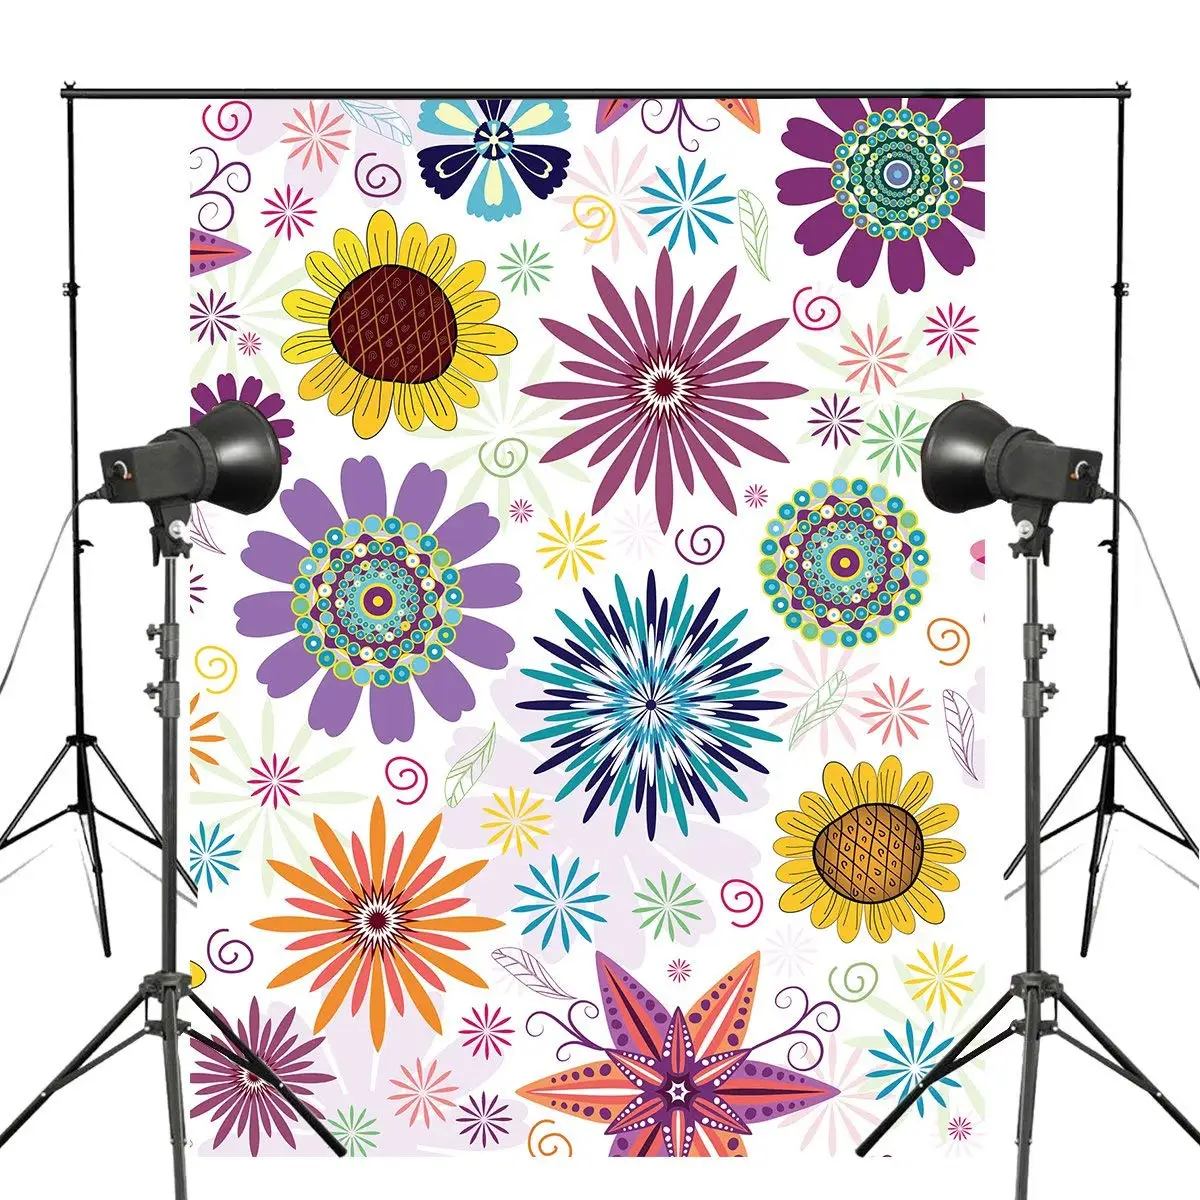 150x220cm Wonderful Colorful Floral Pattern Photography Backdrop Simplistic Flowers Pattern Background Abstract Art pattern of flowers